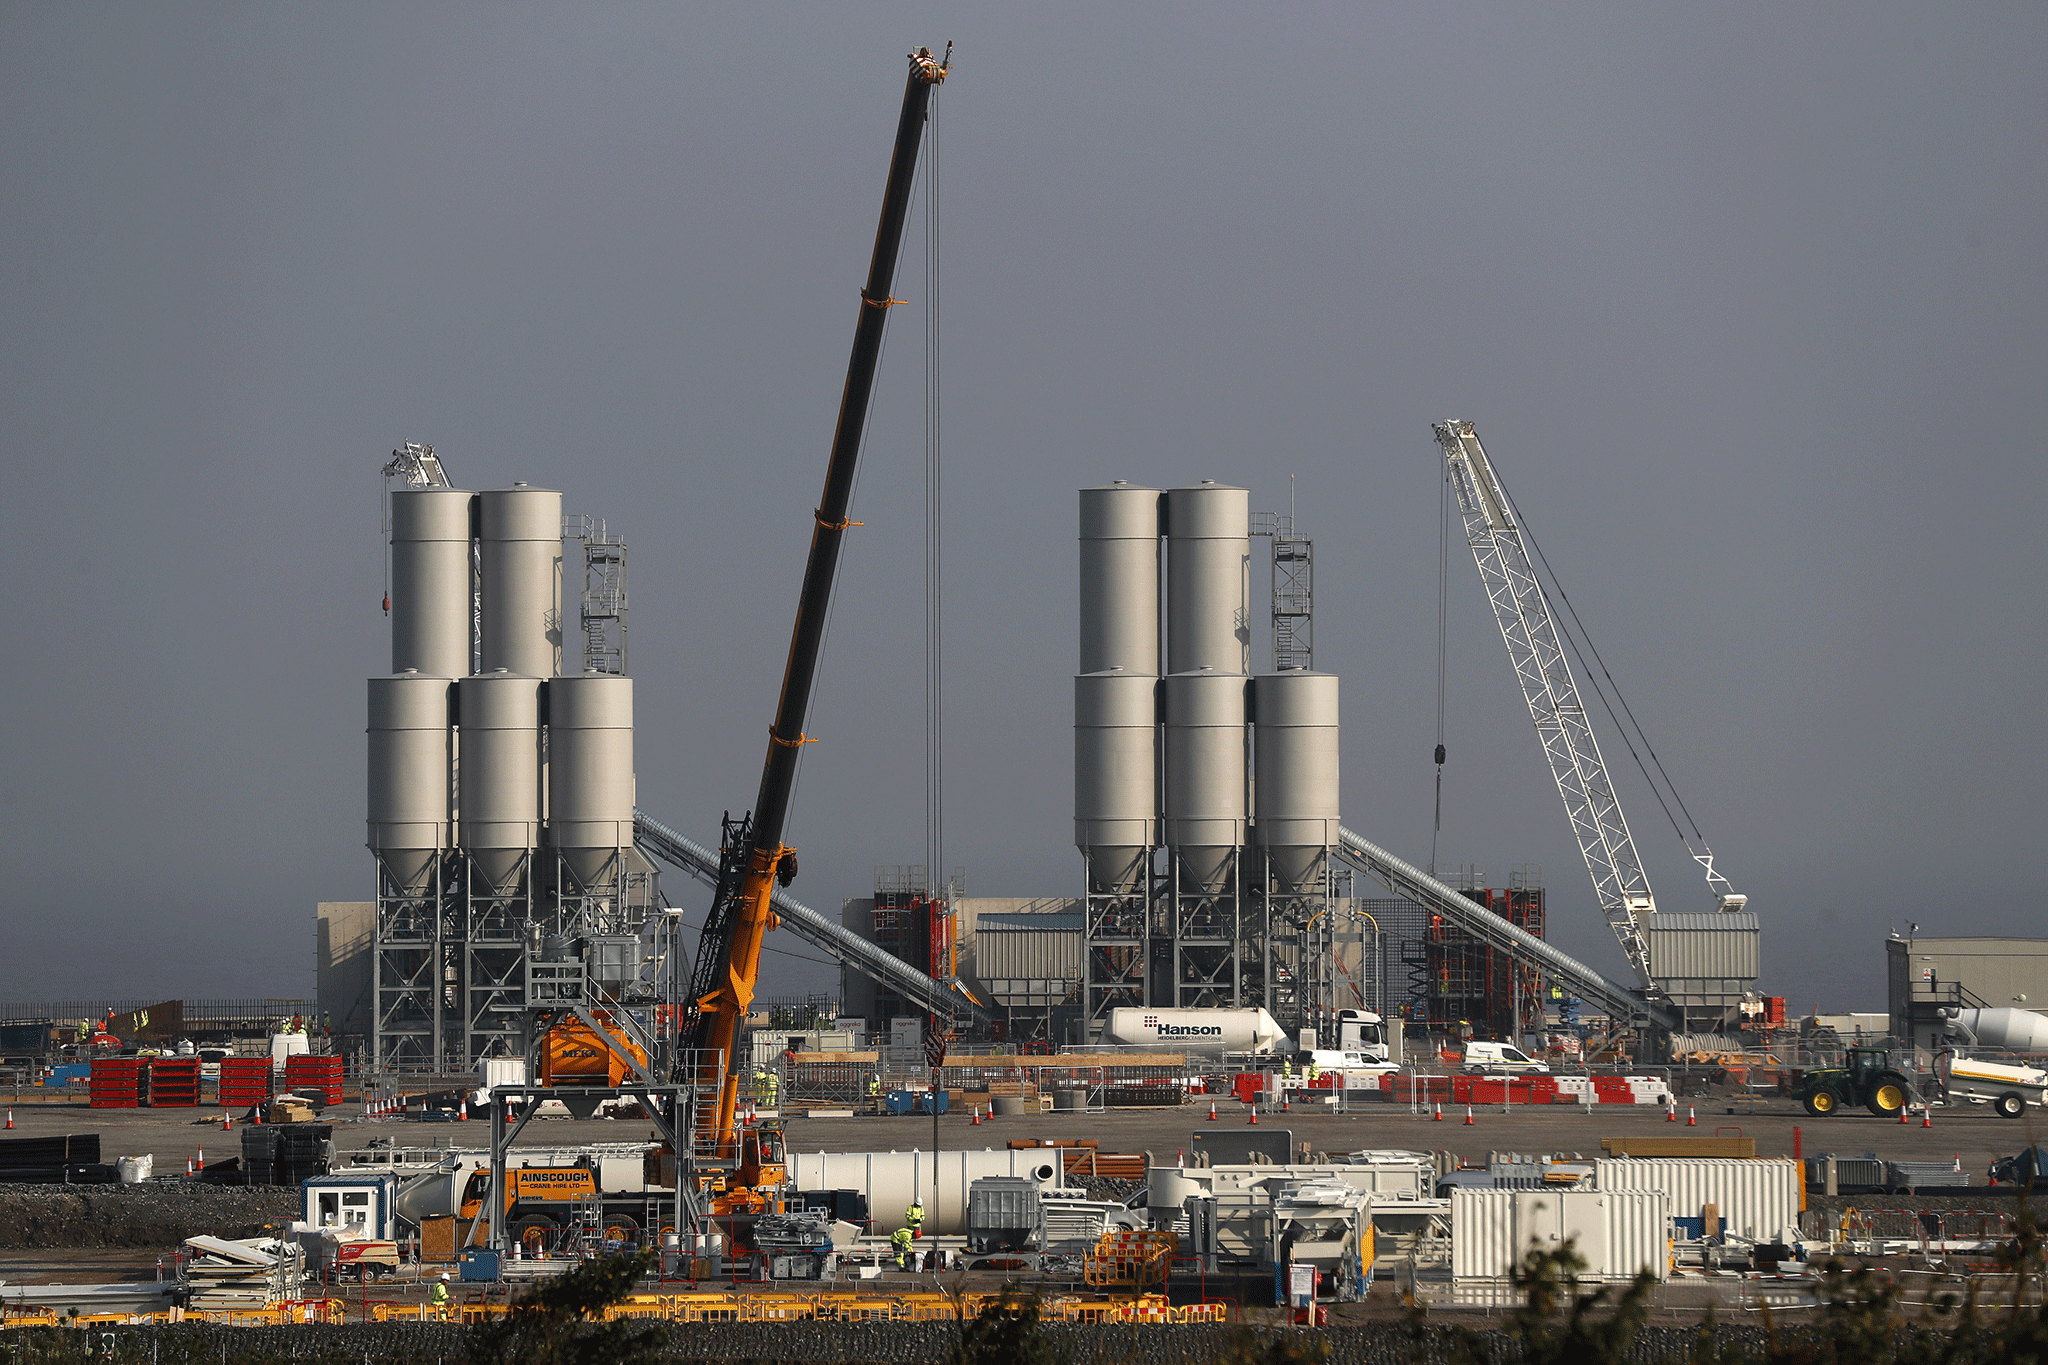 The decision threatens to delay construction of the Hinkley nuclear power plant